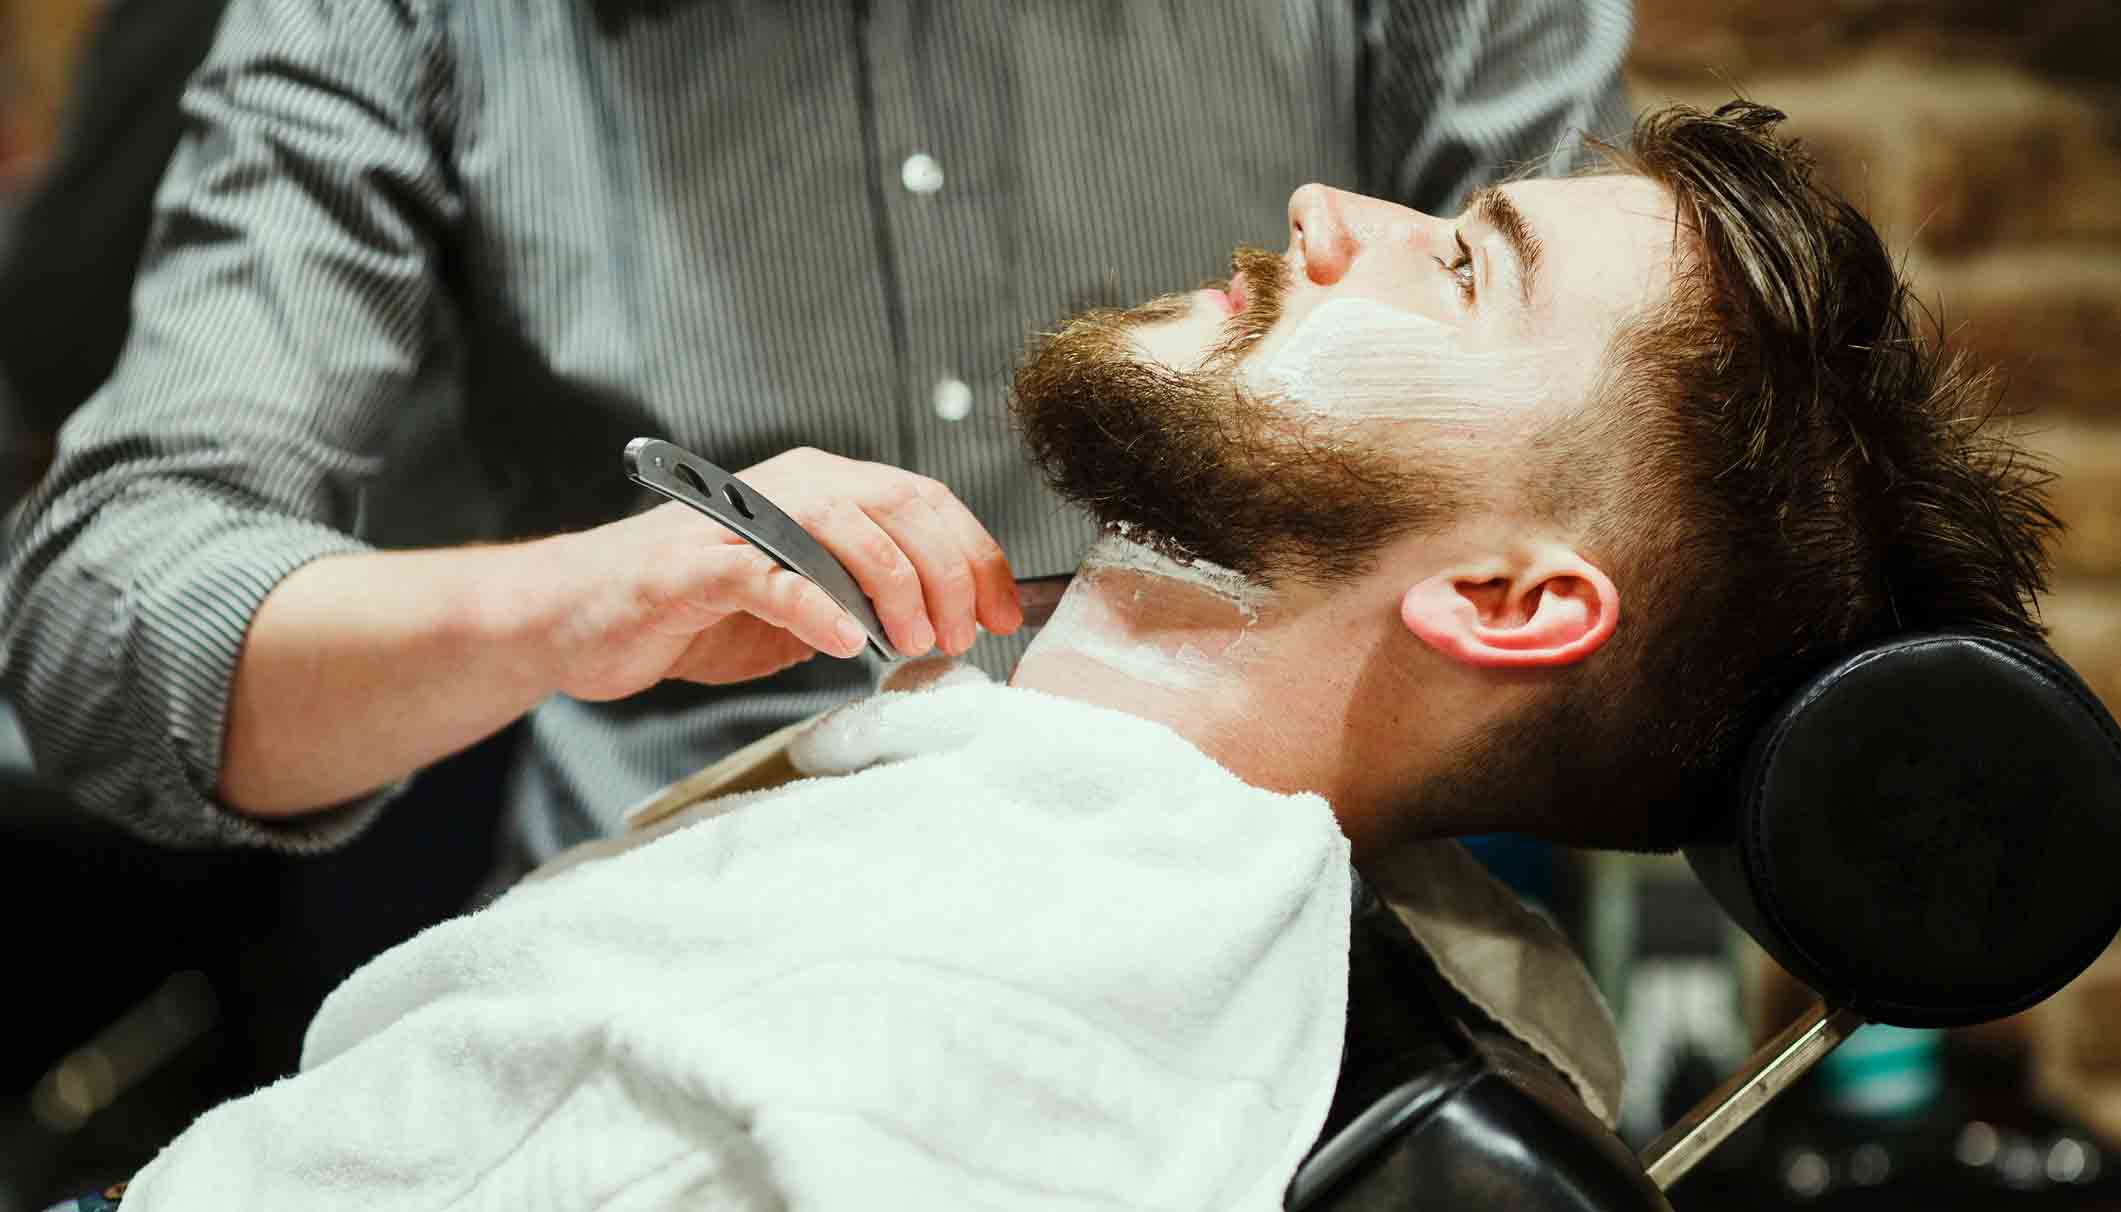 Gaining a client's trust is an important part of upselling in a salon